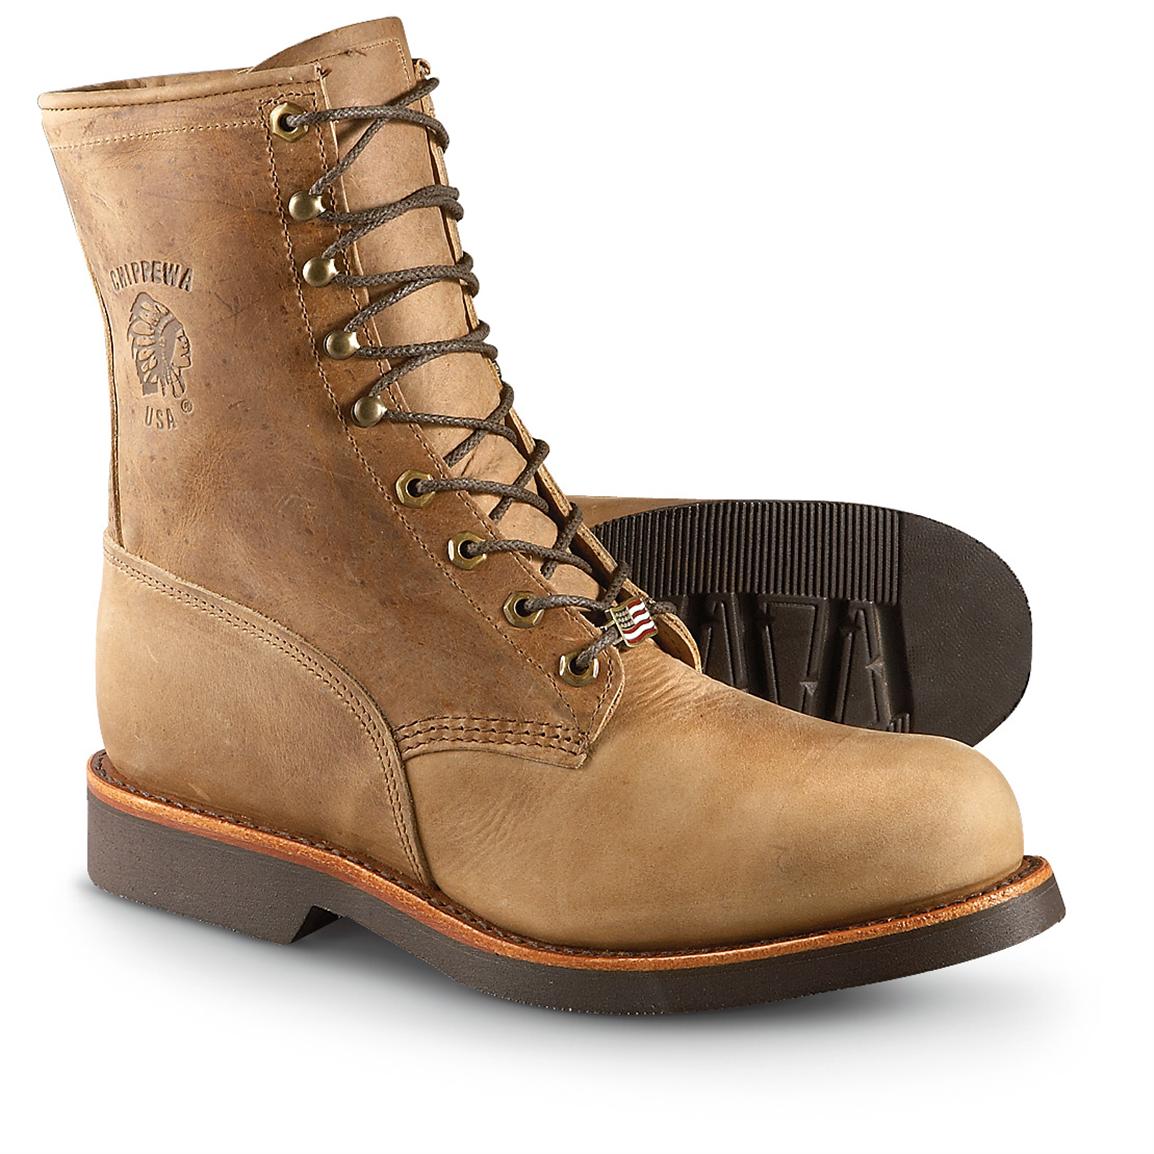 Chippewa Boots Lace To Toe | vlr.eng.br